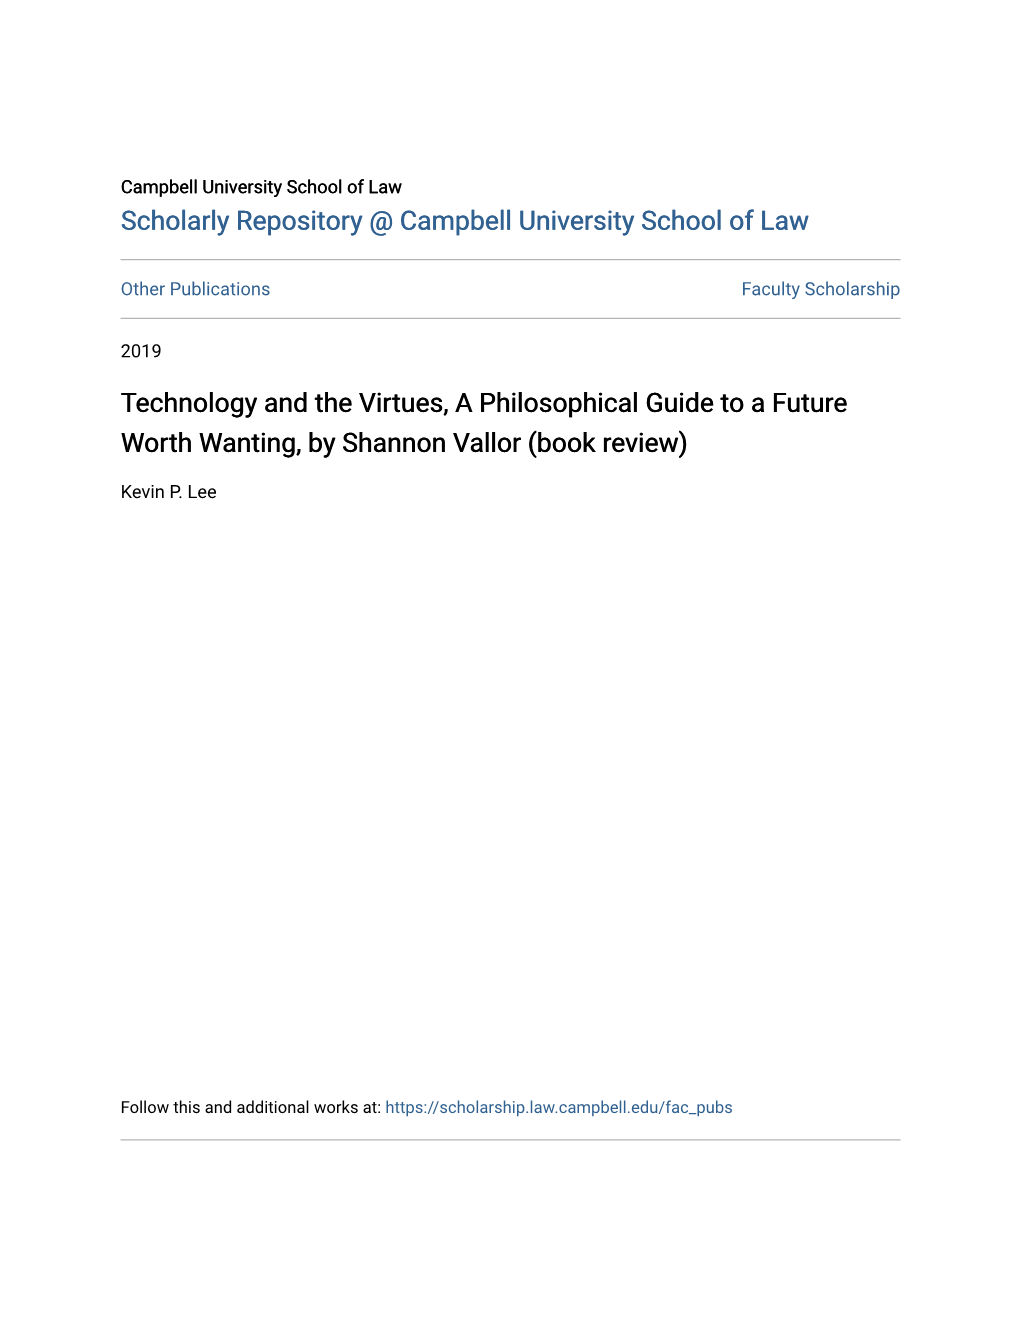 Technology and the Virtues, a Philosophical Guide to a Future Worth Wanting, by Shannon Vallor (Book Review)